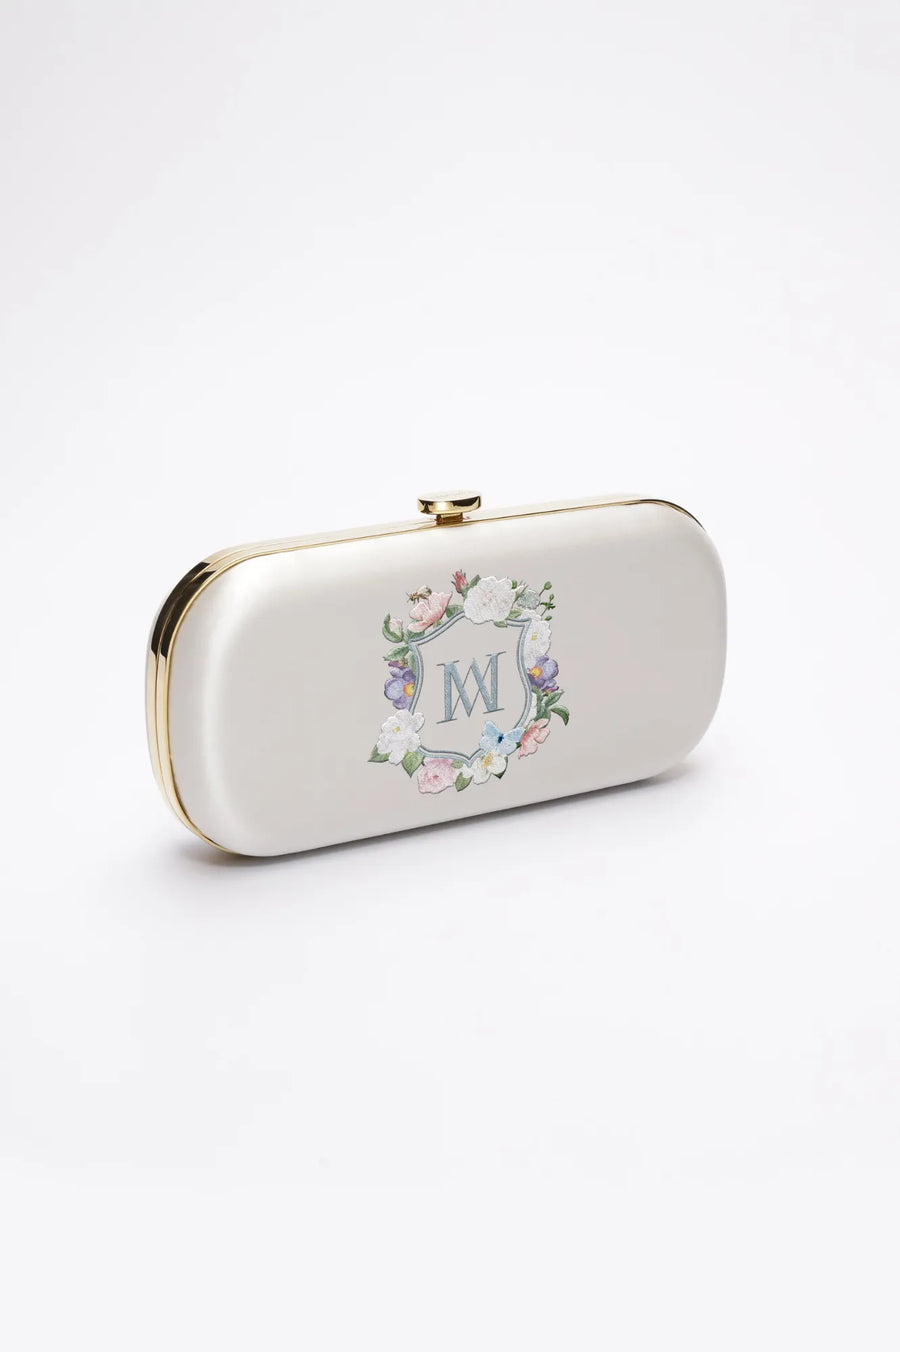 A Ivory Satin Bella Clutch - Monogram Floral Crest purse from The Bella Rosa Collection.